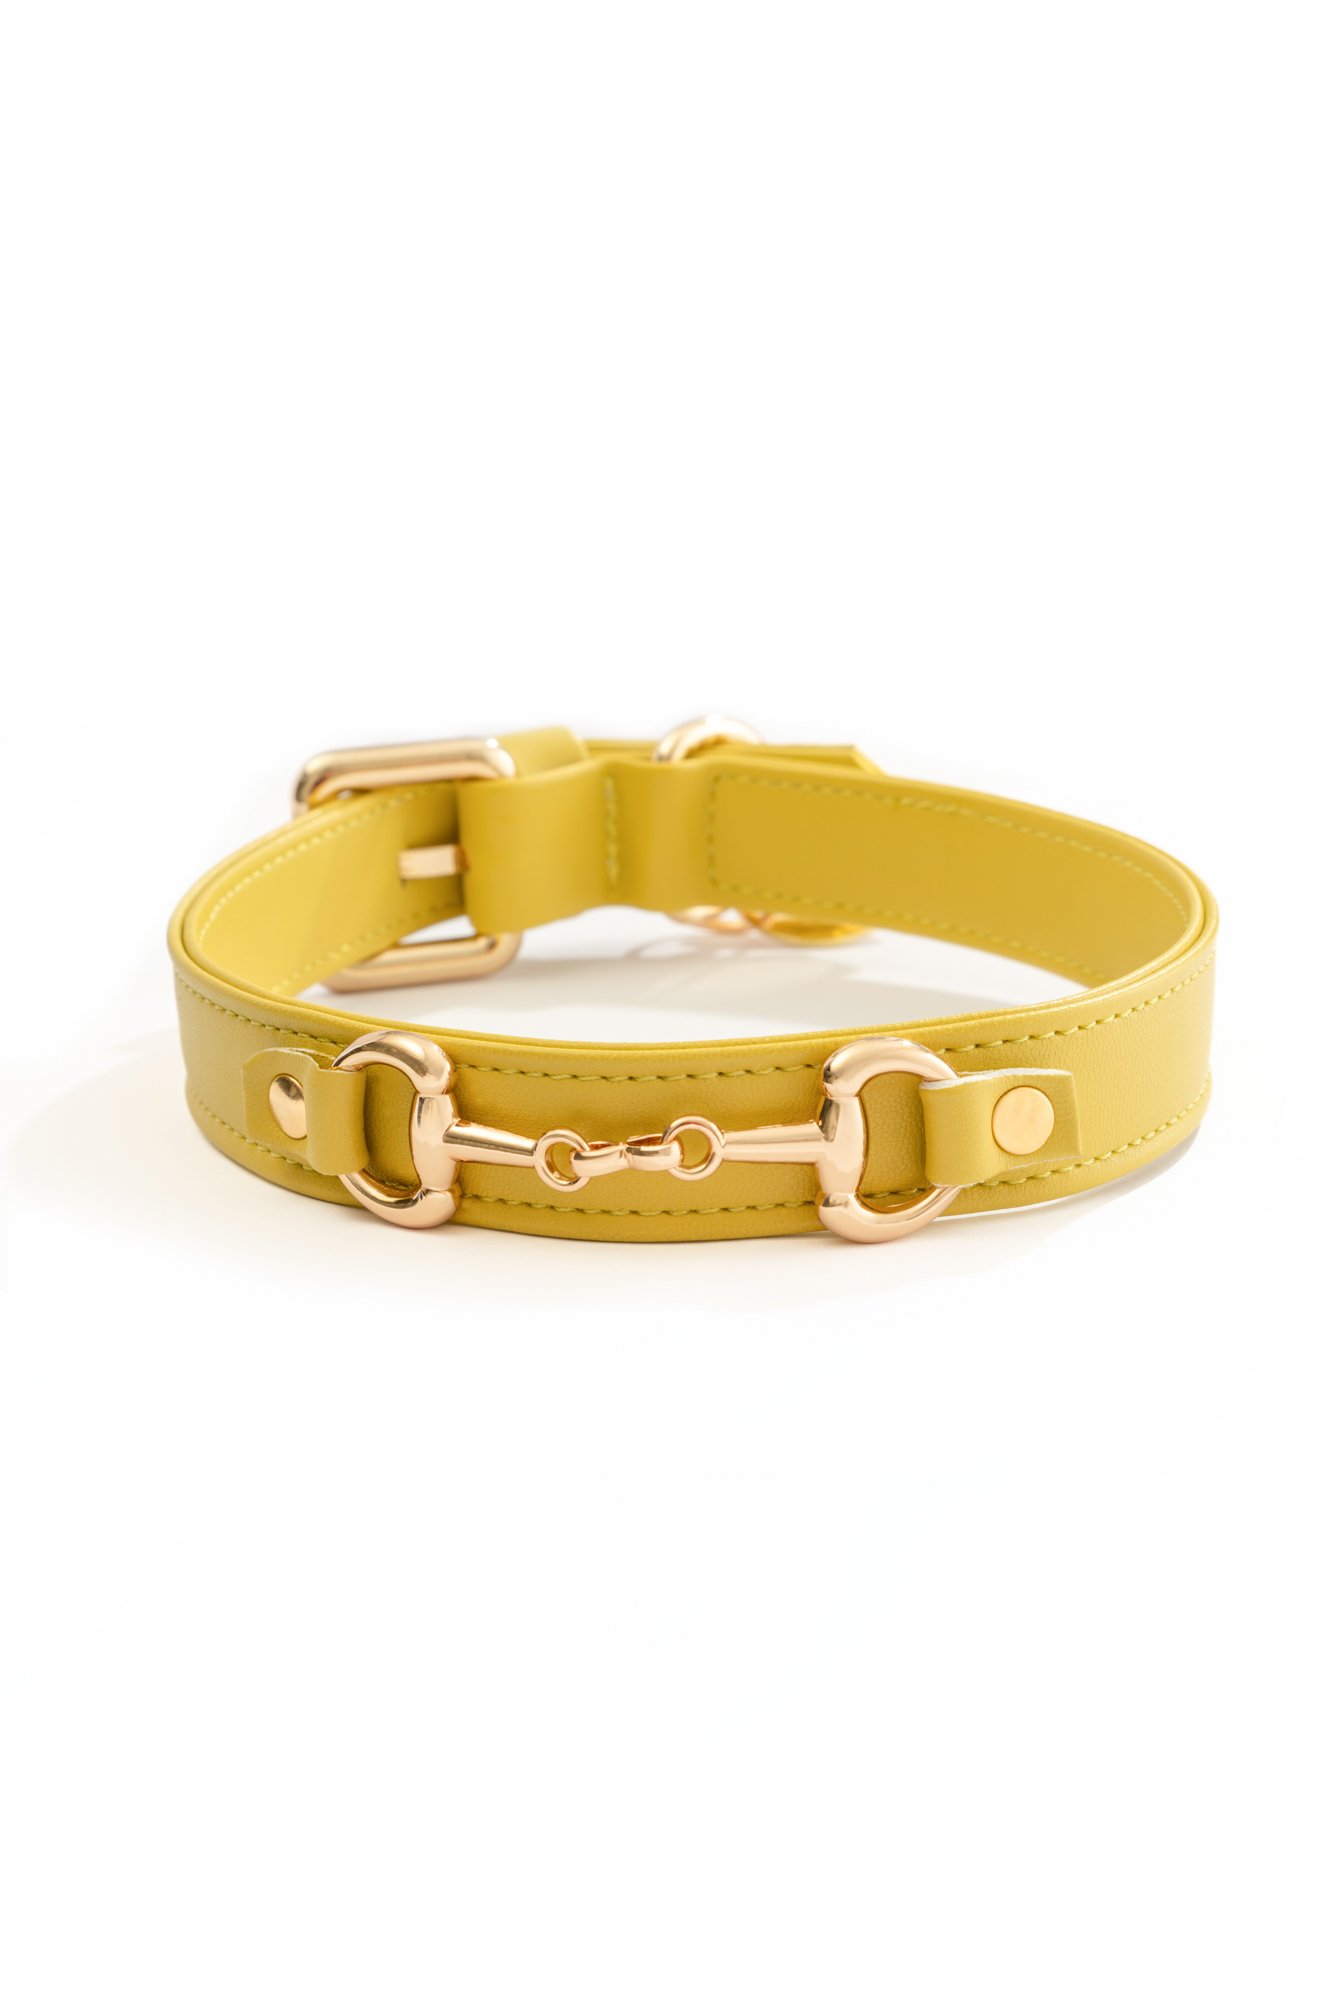 LEATHERETTE COLLAR WITH GOLDEN CLAMP